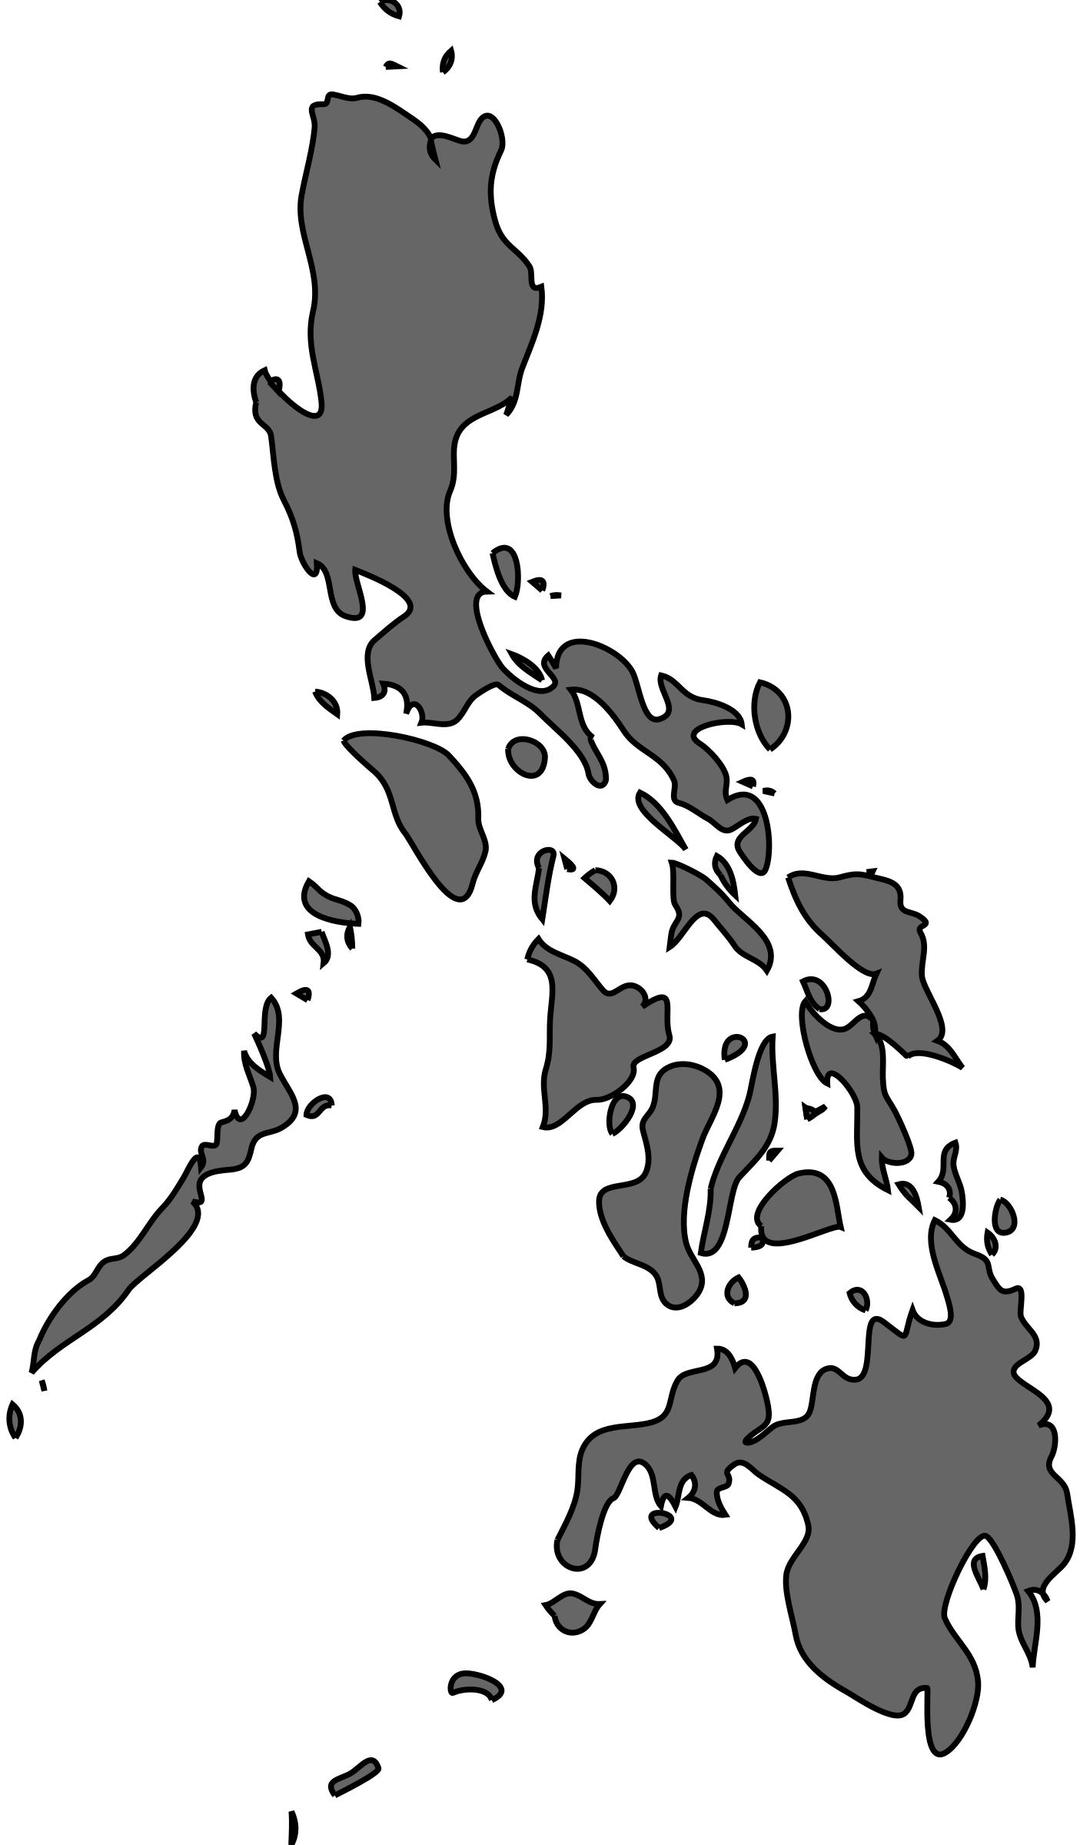 Philippine Map Simplified png transparent